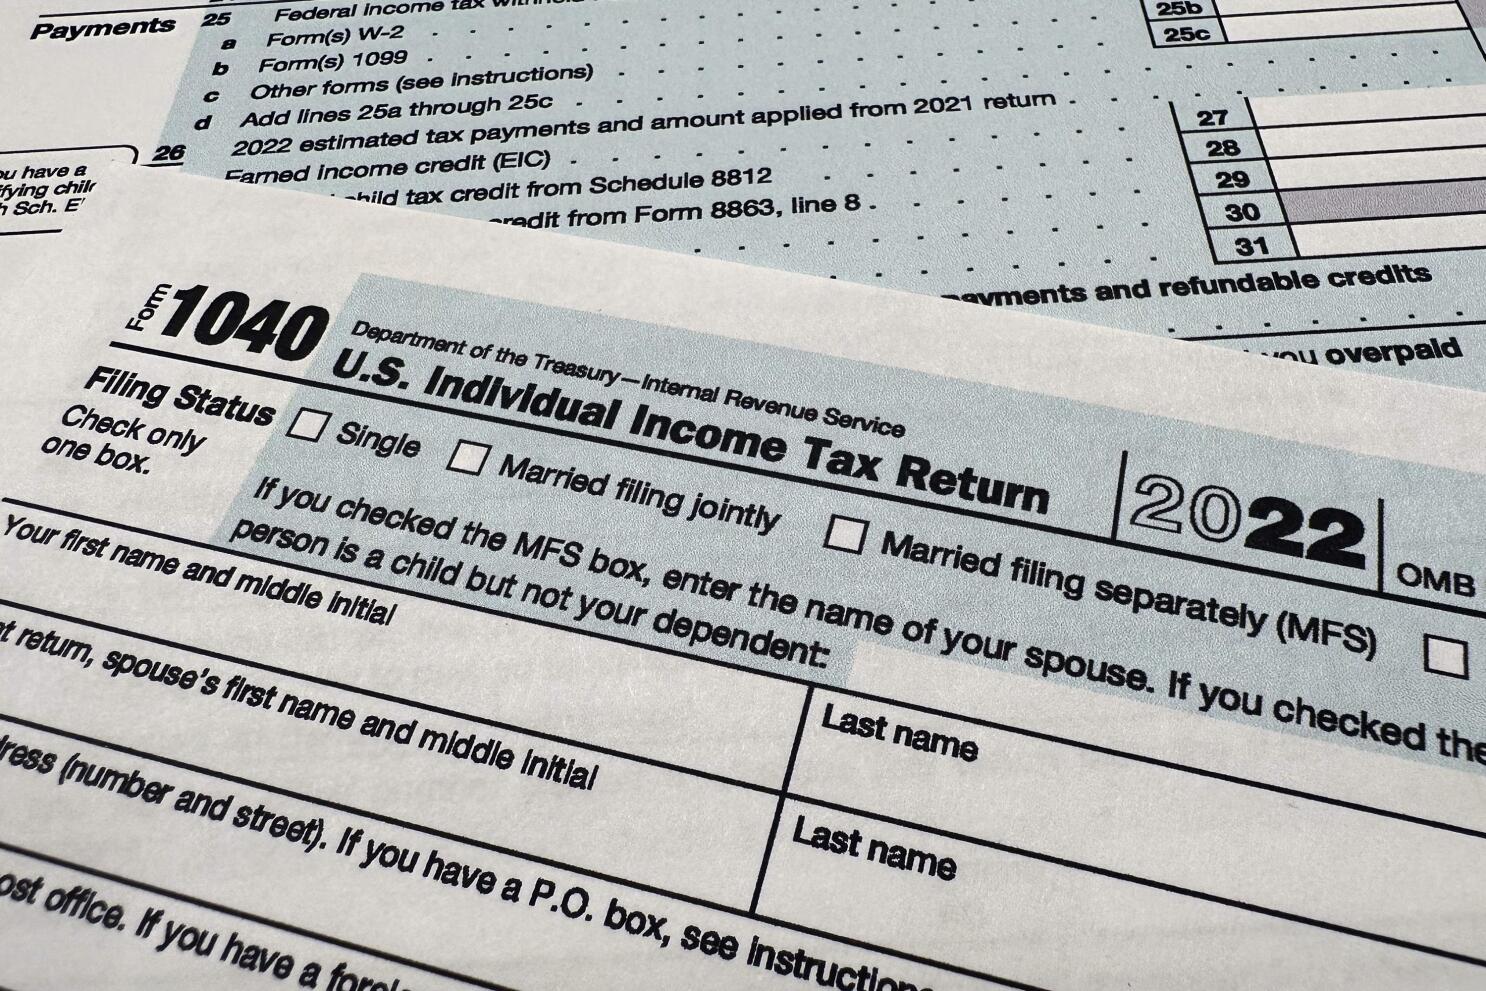 IRS moves forward with free e-filing system in pilot program to ...